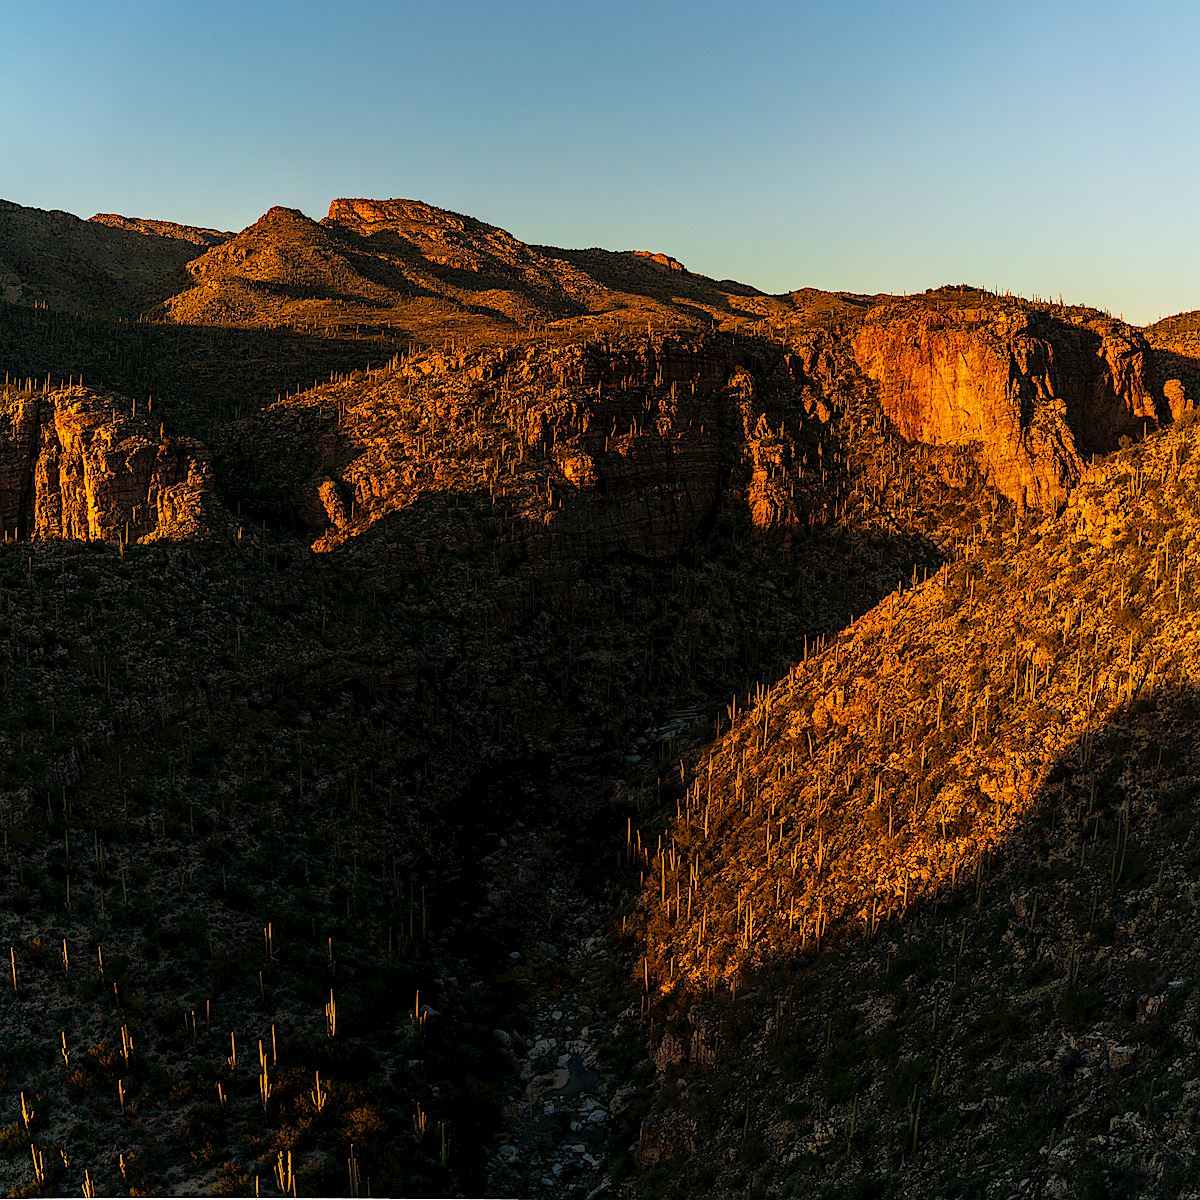 Sunset from the edge of Agua Caliente Canyon. January 2019.